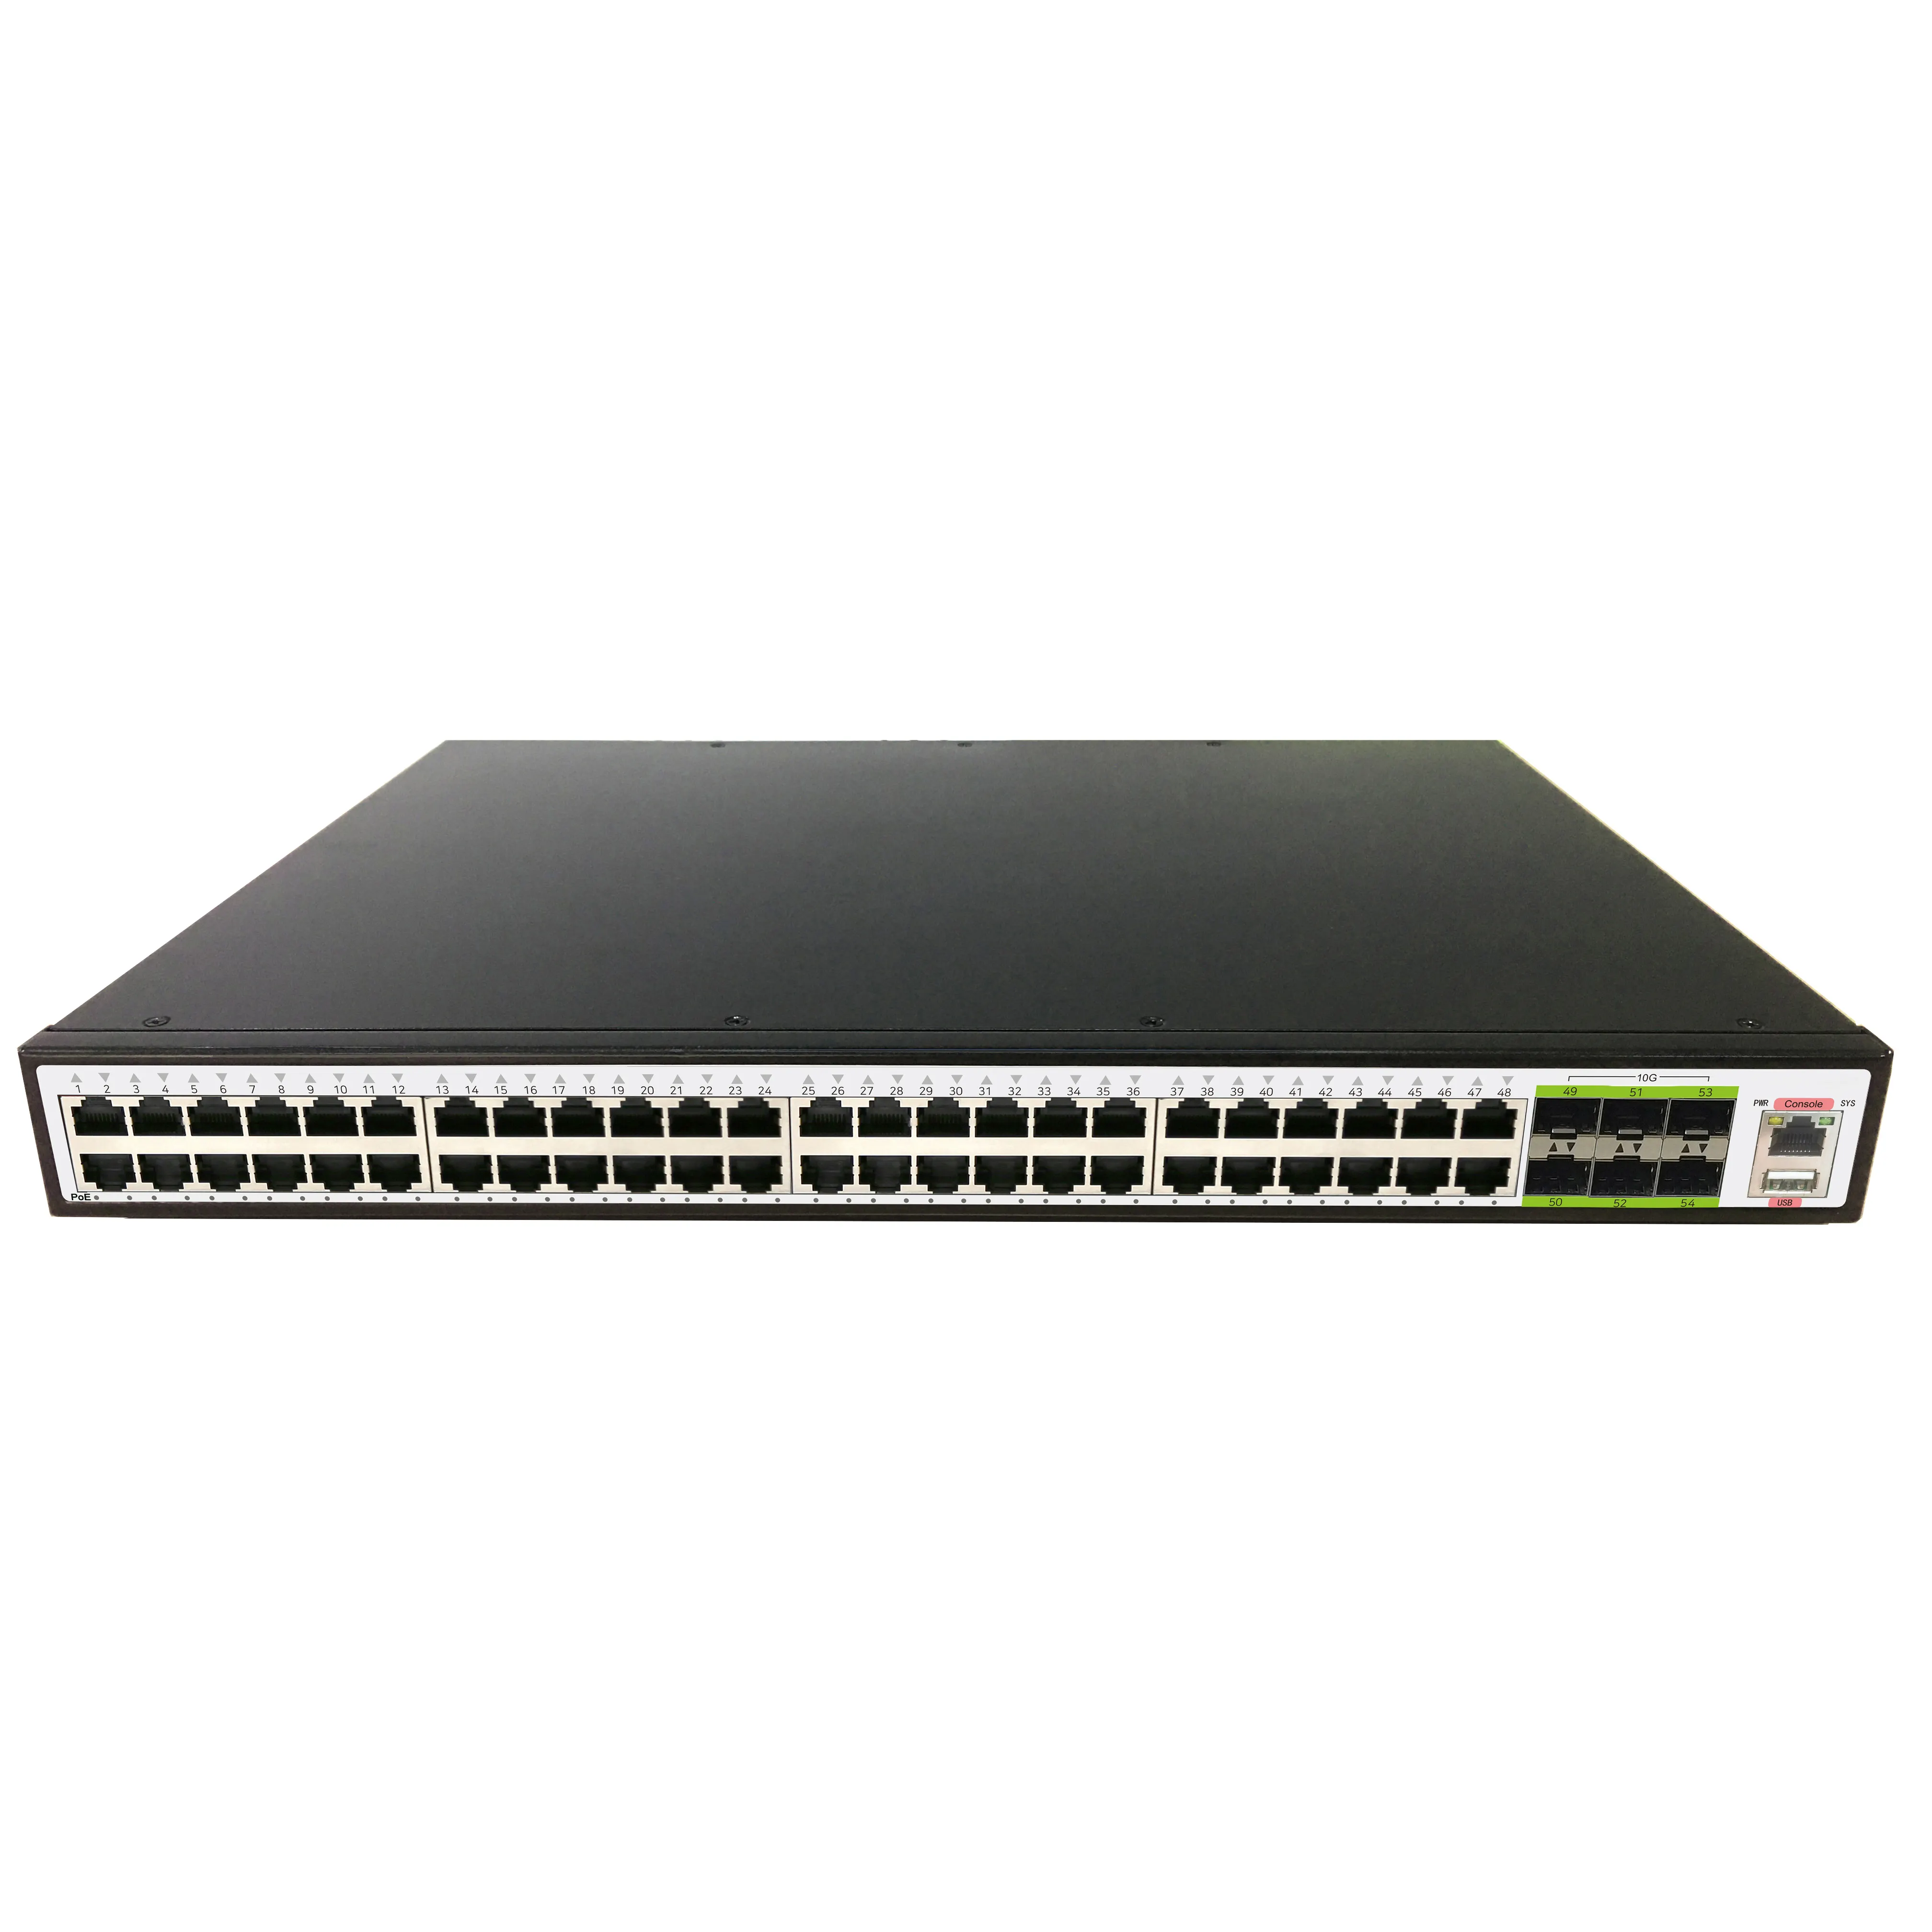 OEM/ODM 48-Port POE+ network switch CCTV security solution for IP camera